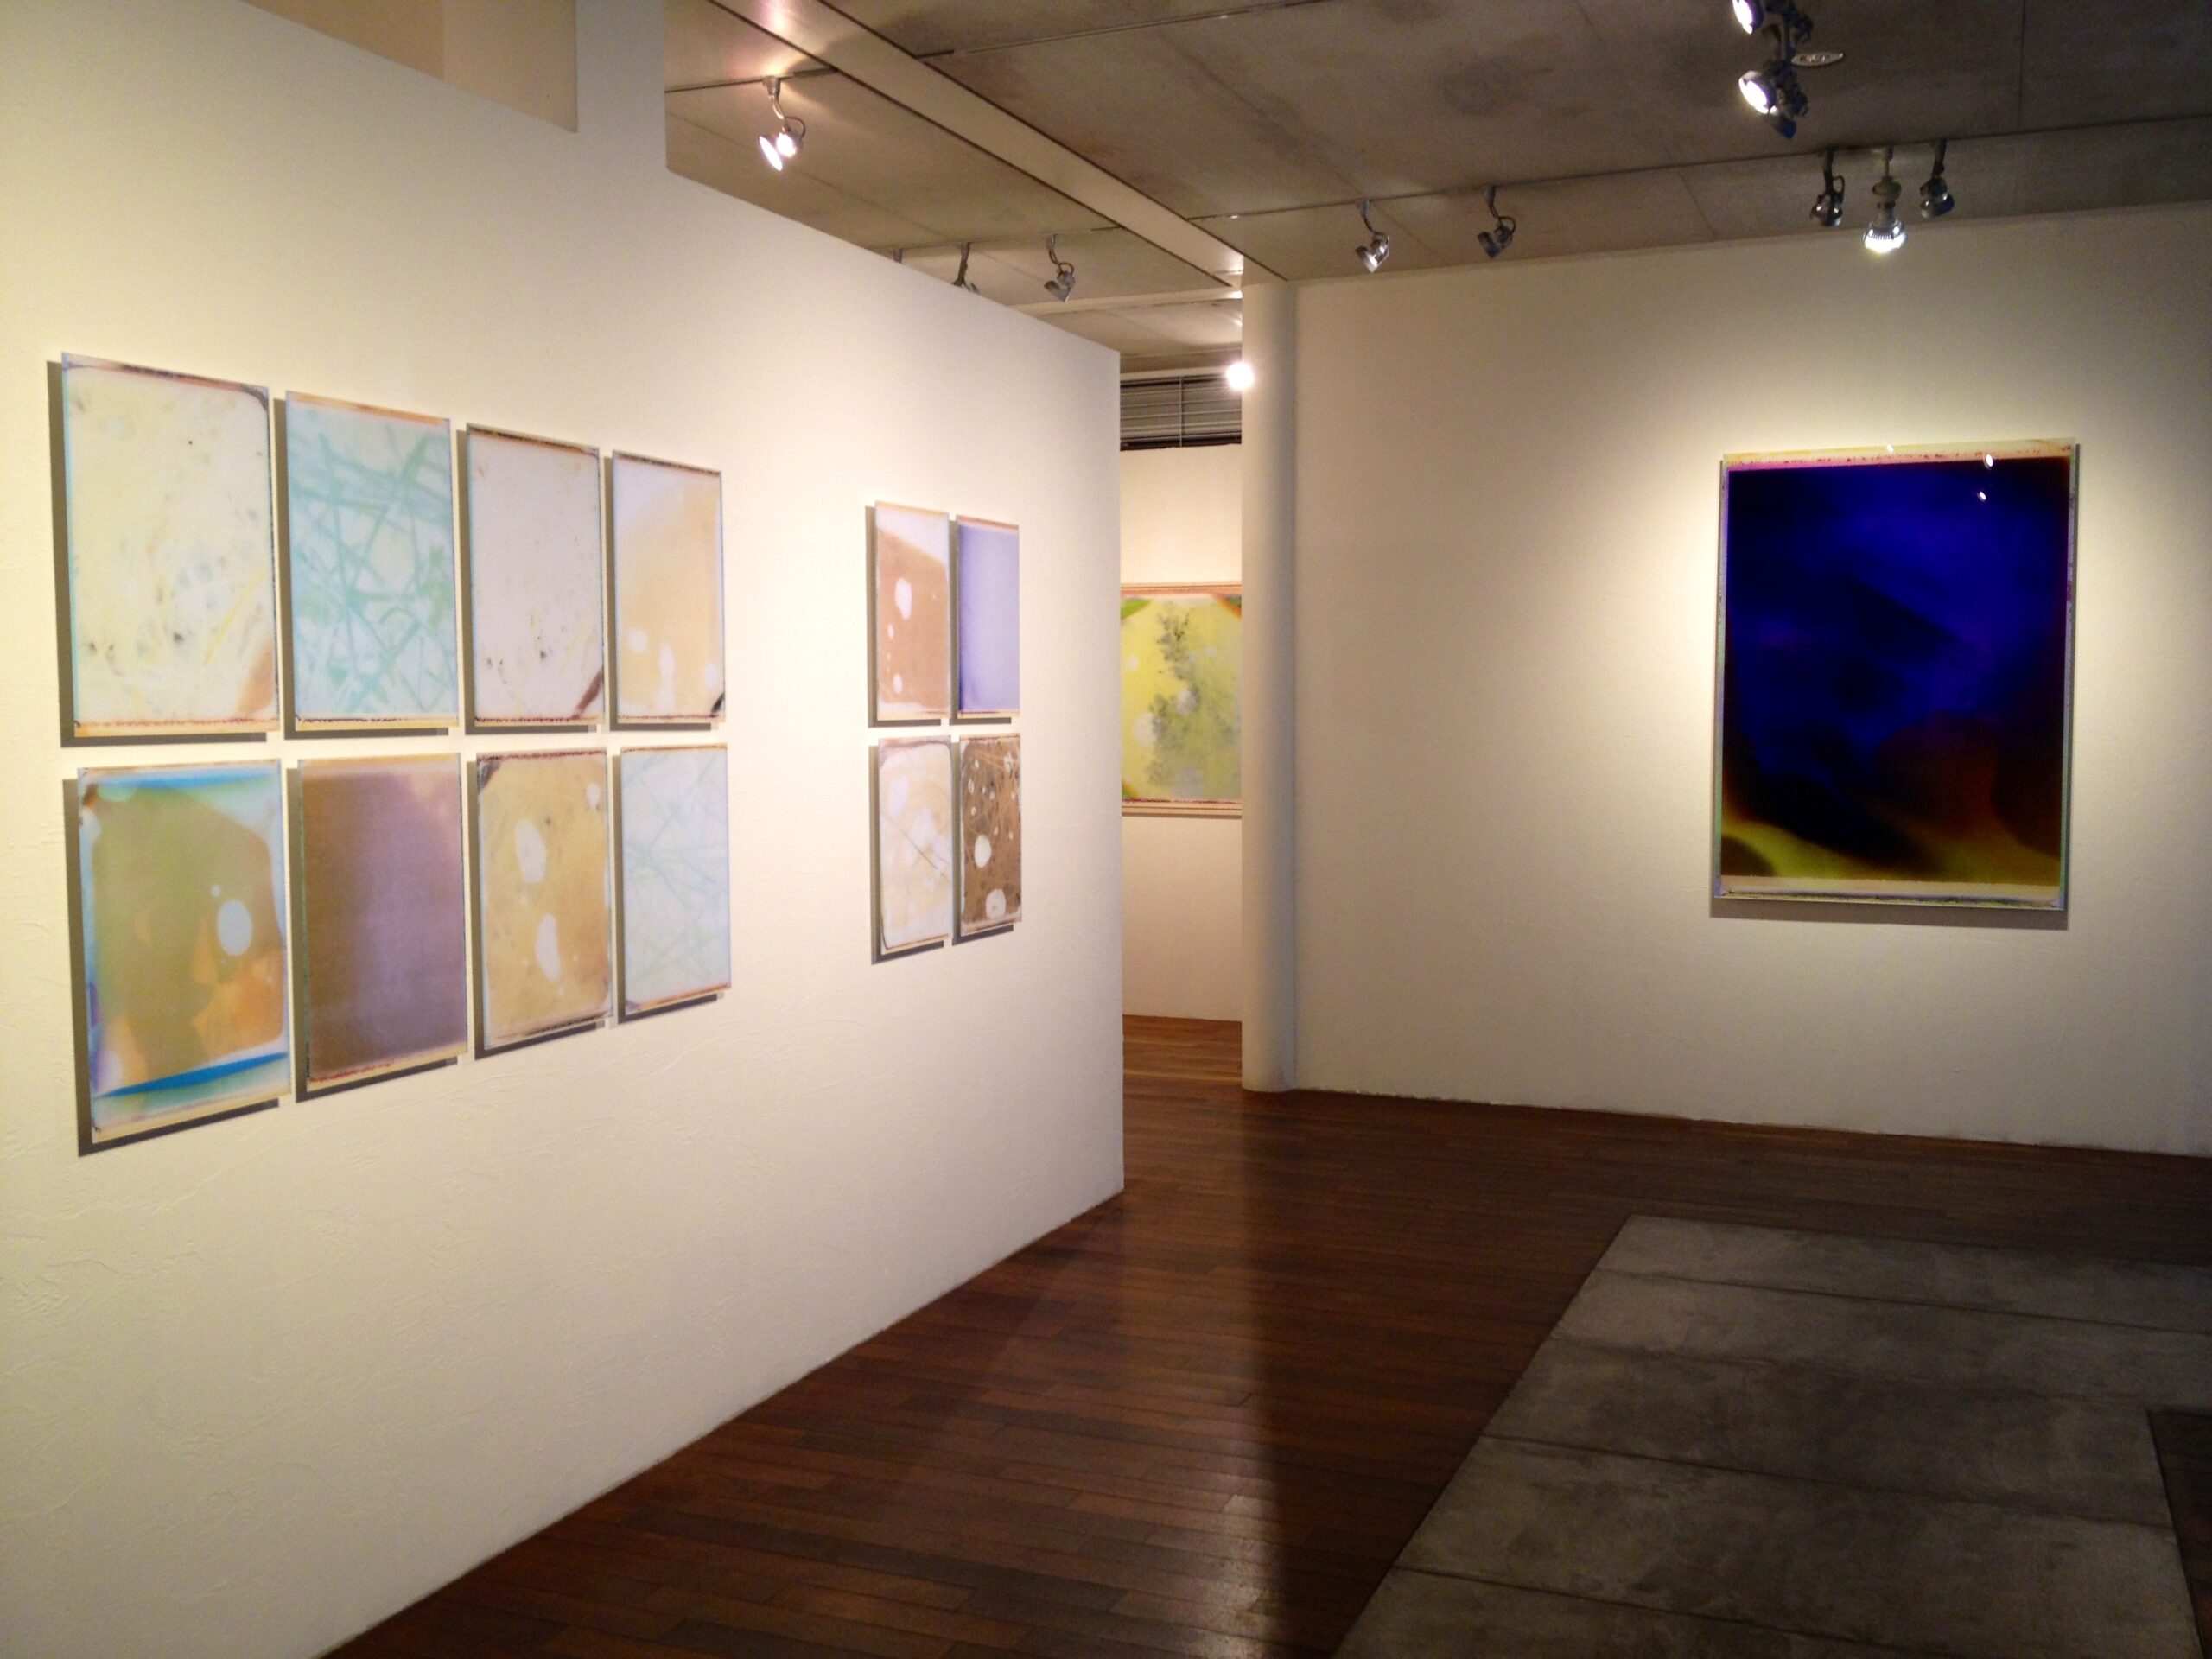 Neuma, EMON PHOTO GALLERY, Tokyo, March 9 to April 10, 2012, solo show